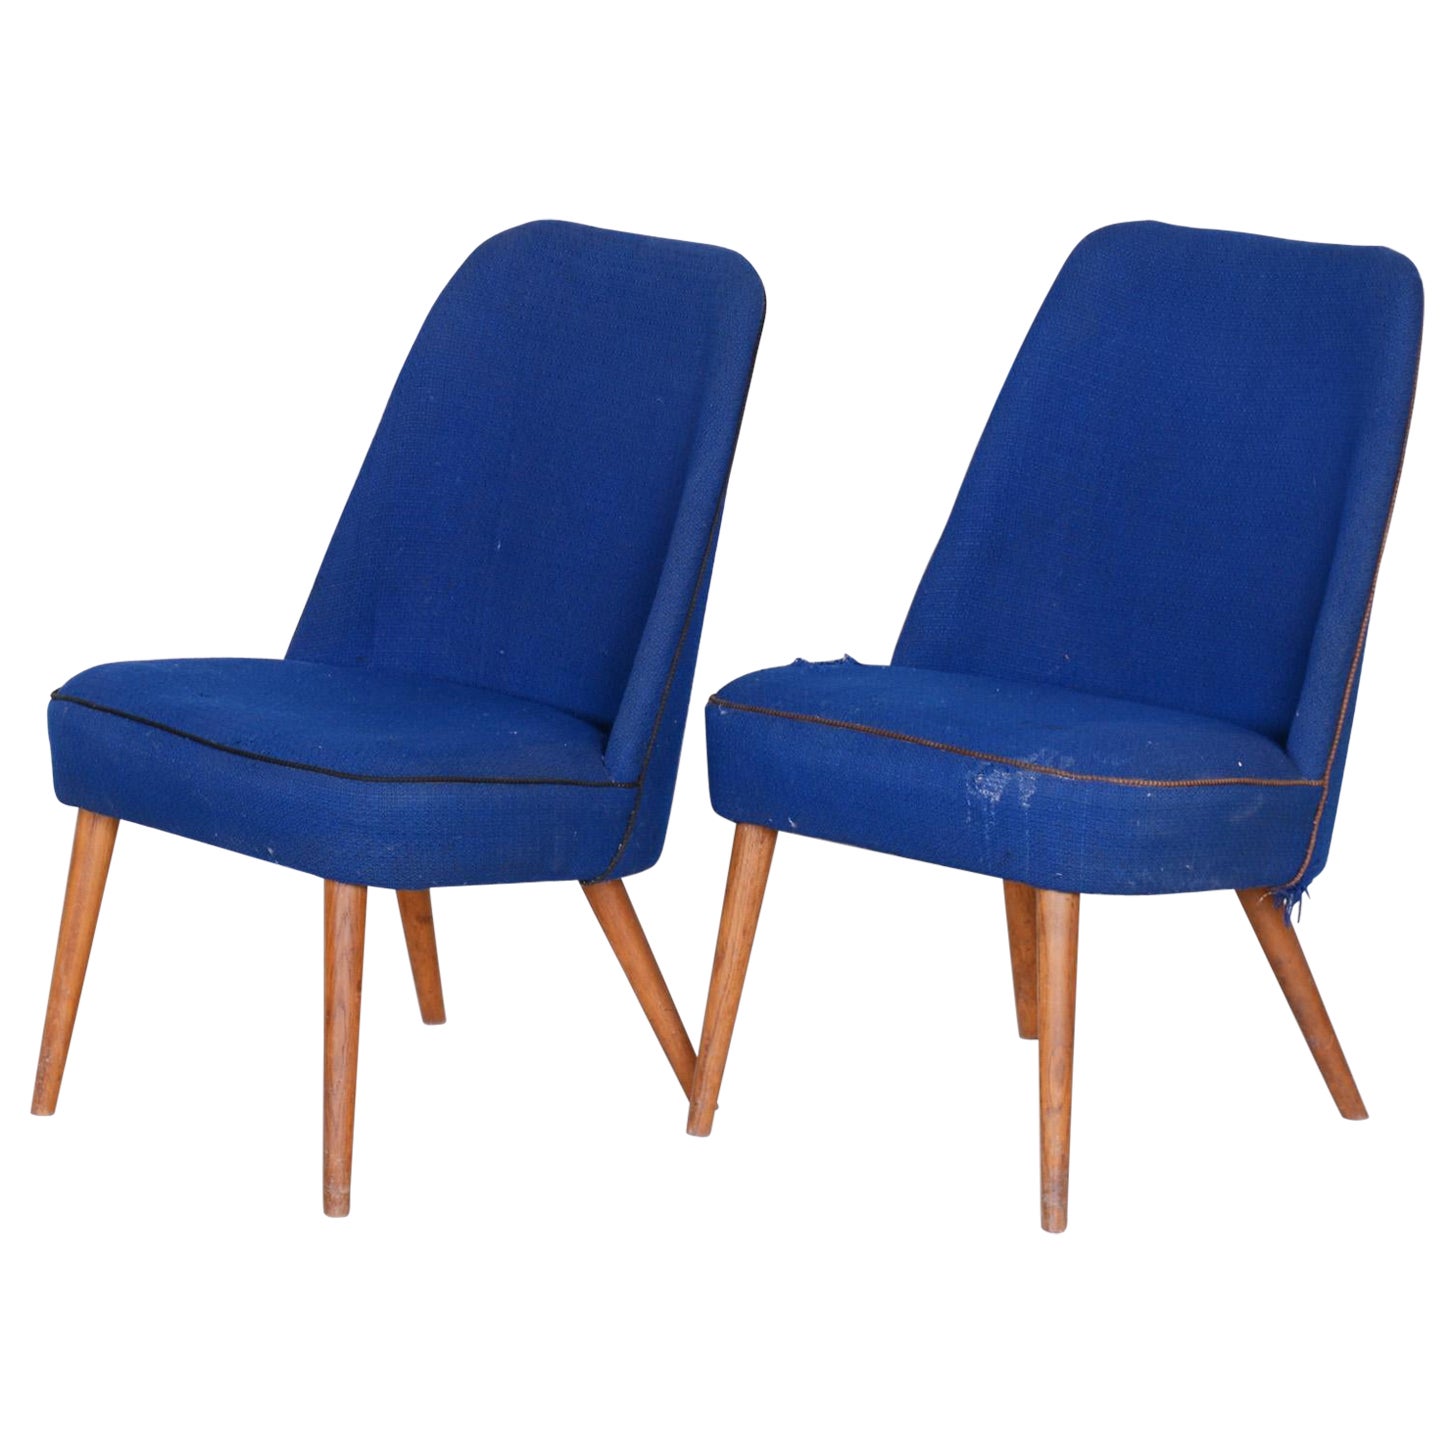 Set of 2 Blue Mid Century Armchairs, Made in 1950s Czechia. Ash, Original